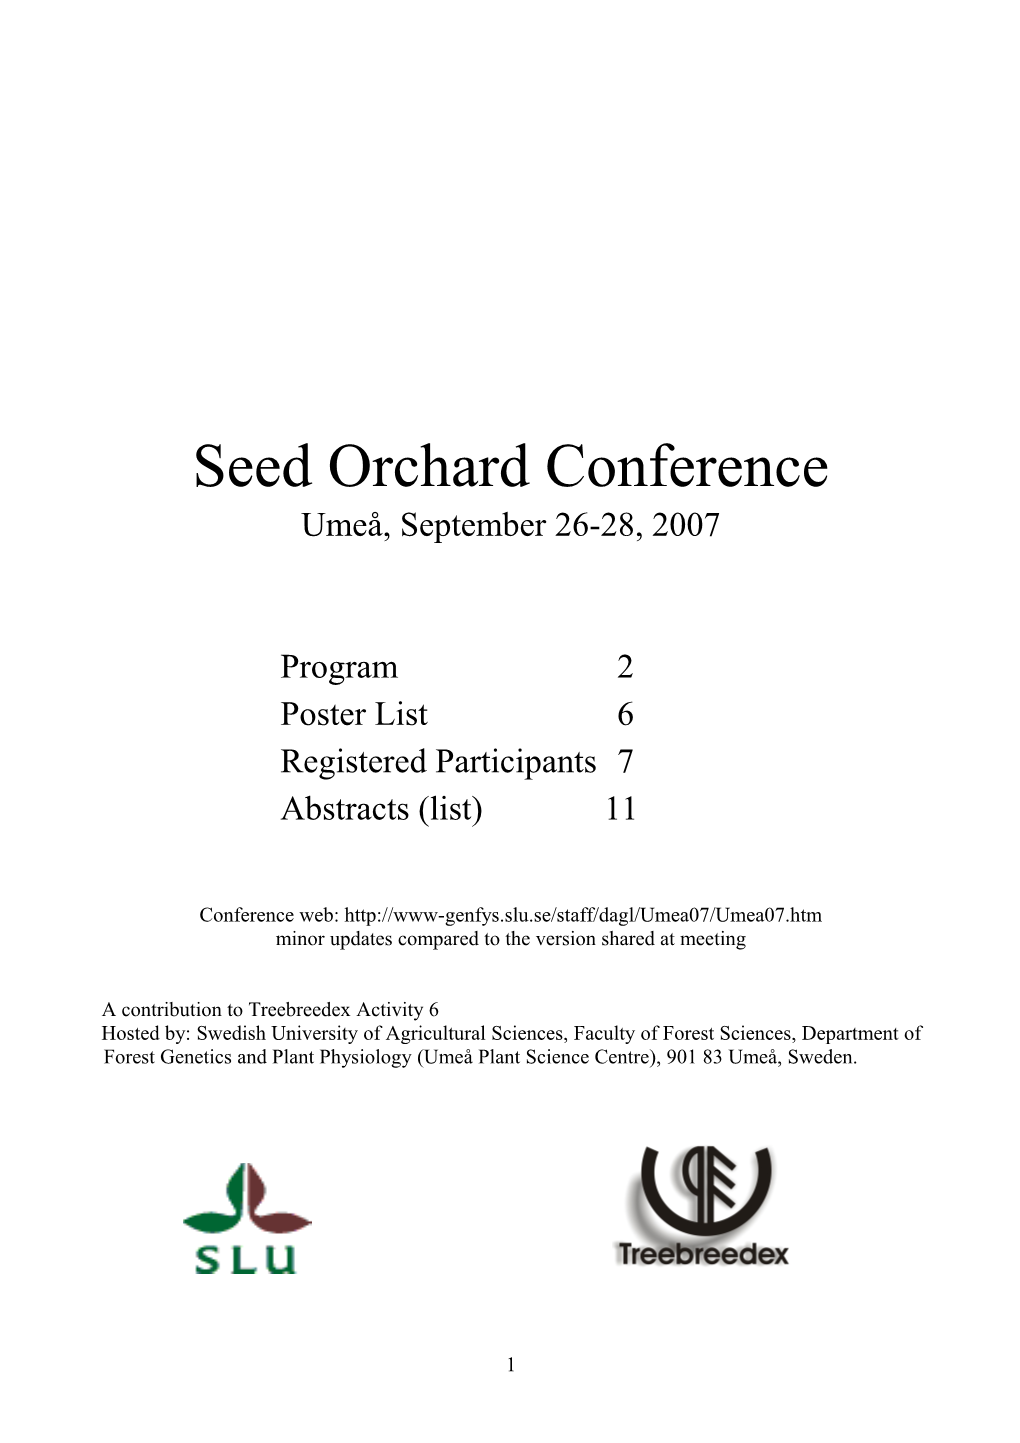 List of Registered Participants at Seed Orchard Conference Umeå 26-28 August